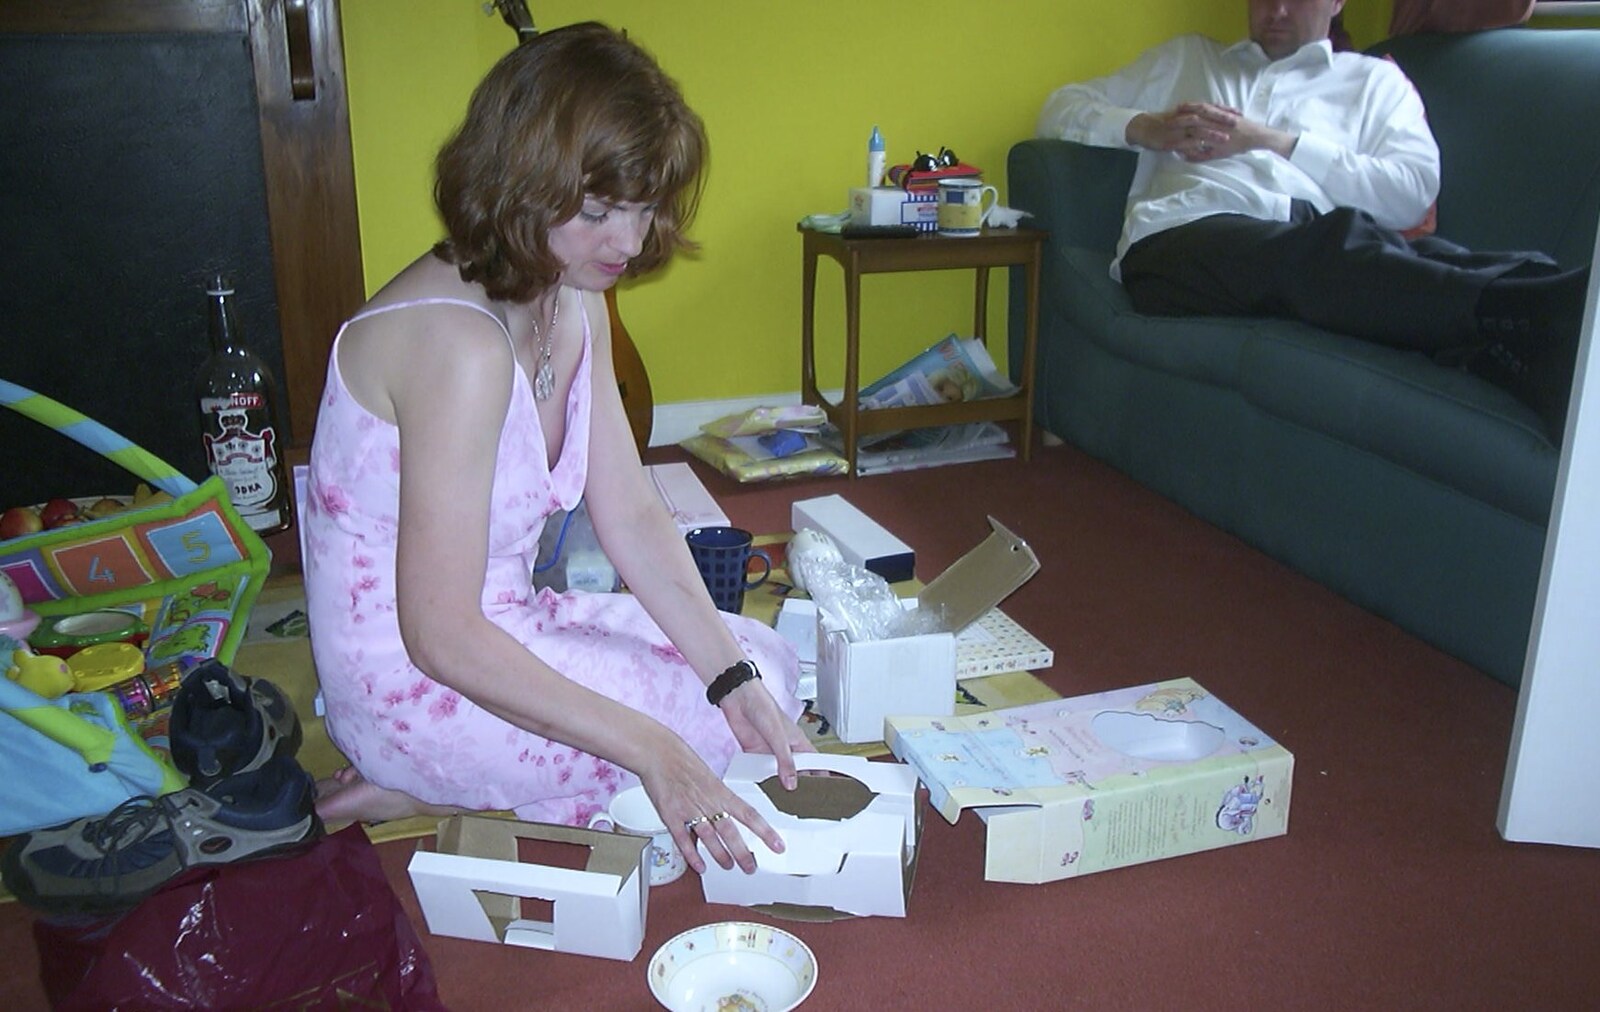 Michelle opens up presents from Sydney's Christening, Hordle, Hampshire - 4th May 2002